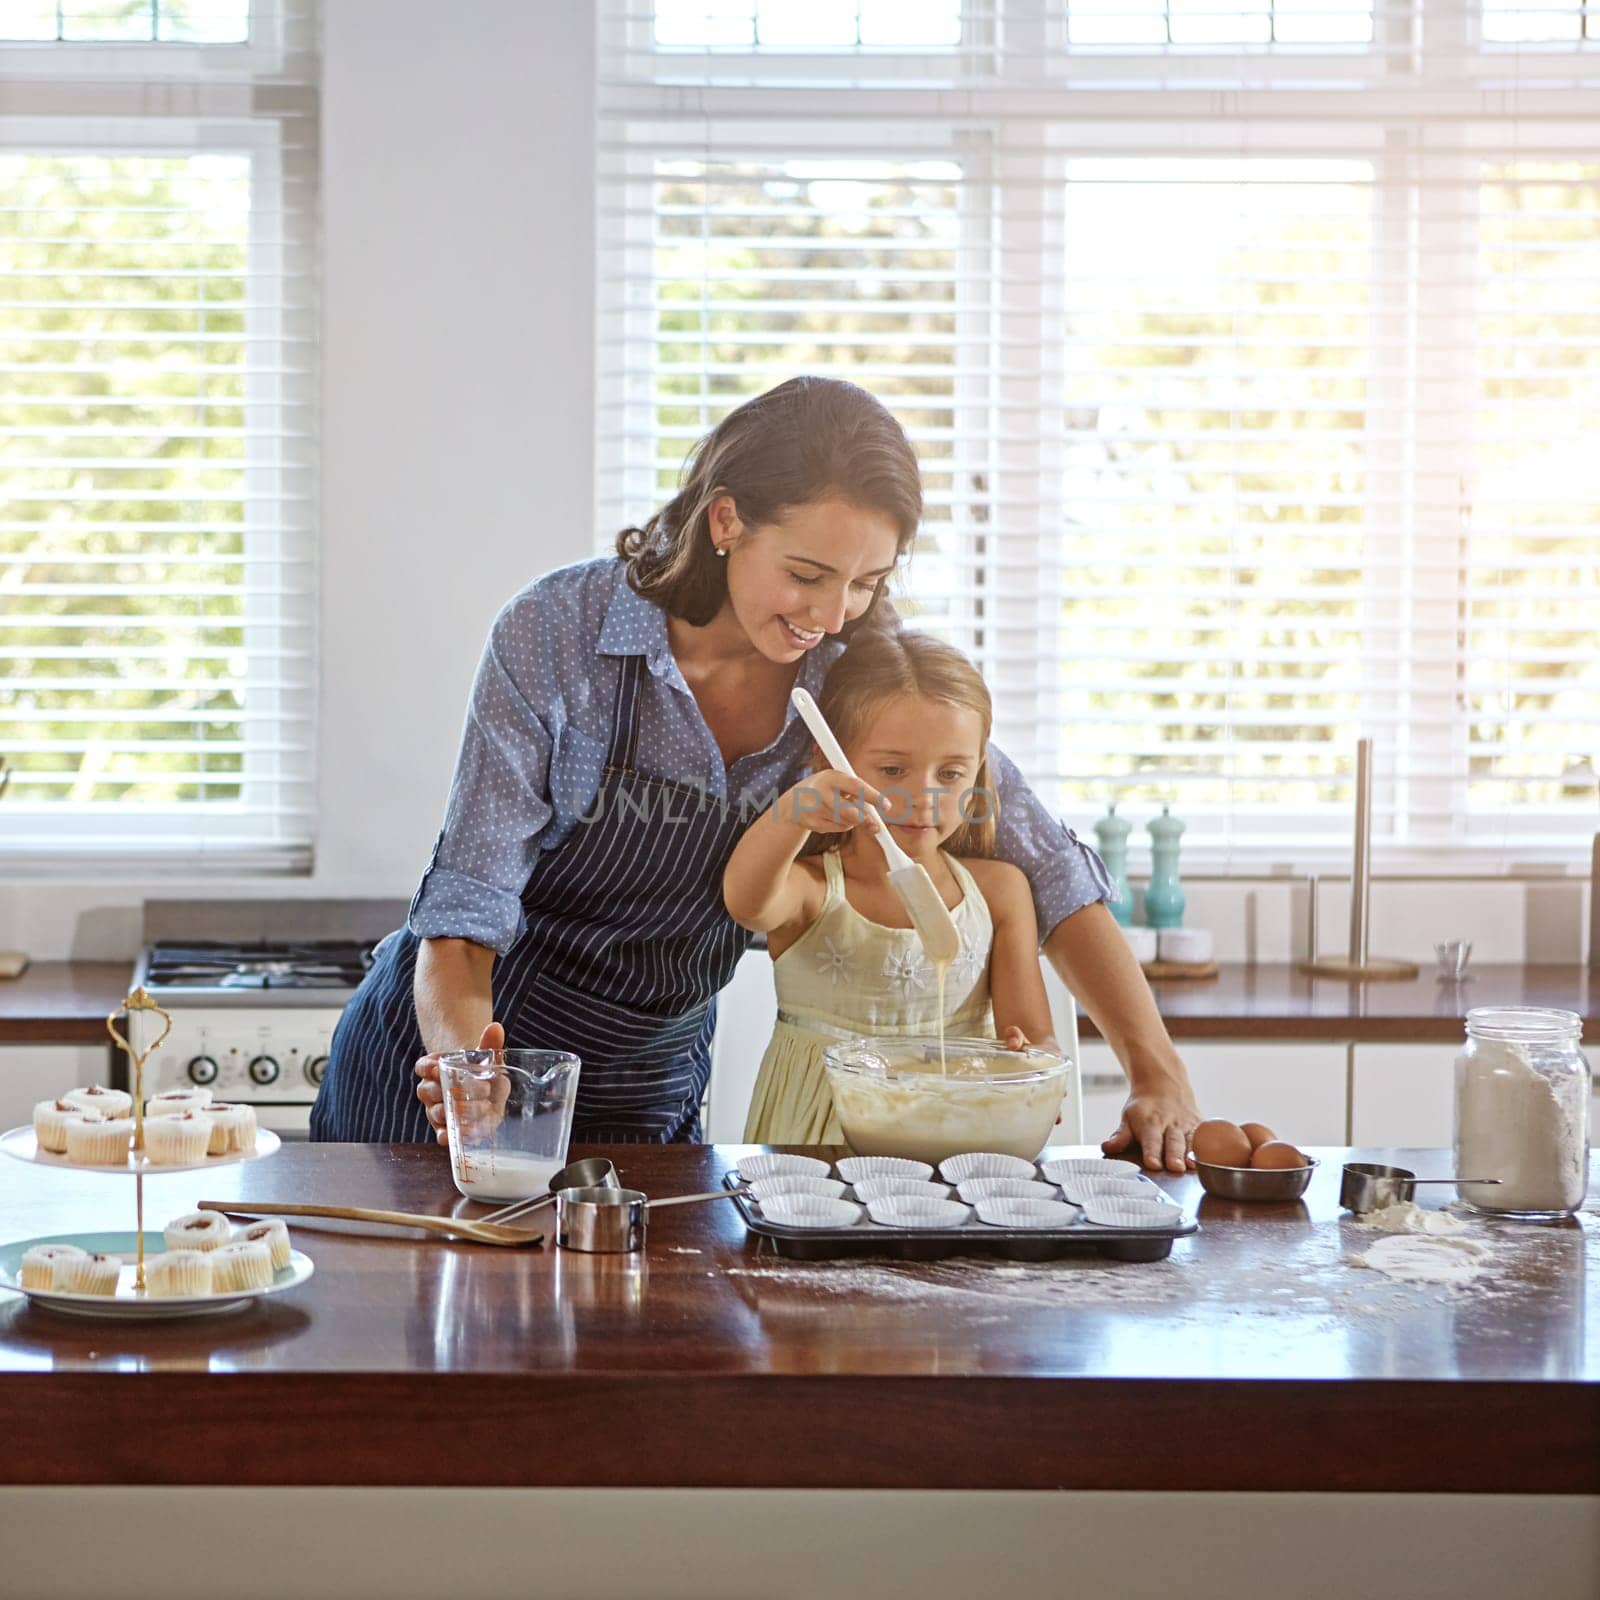 Learning how to bake with mom. a mother and her daughter baking in the kitchen